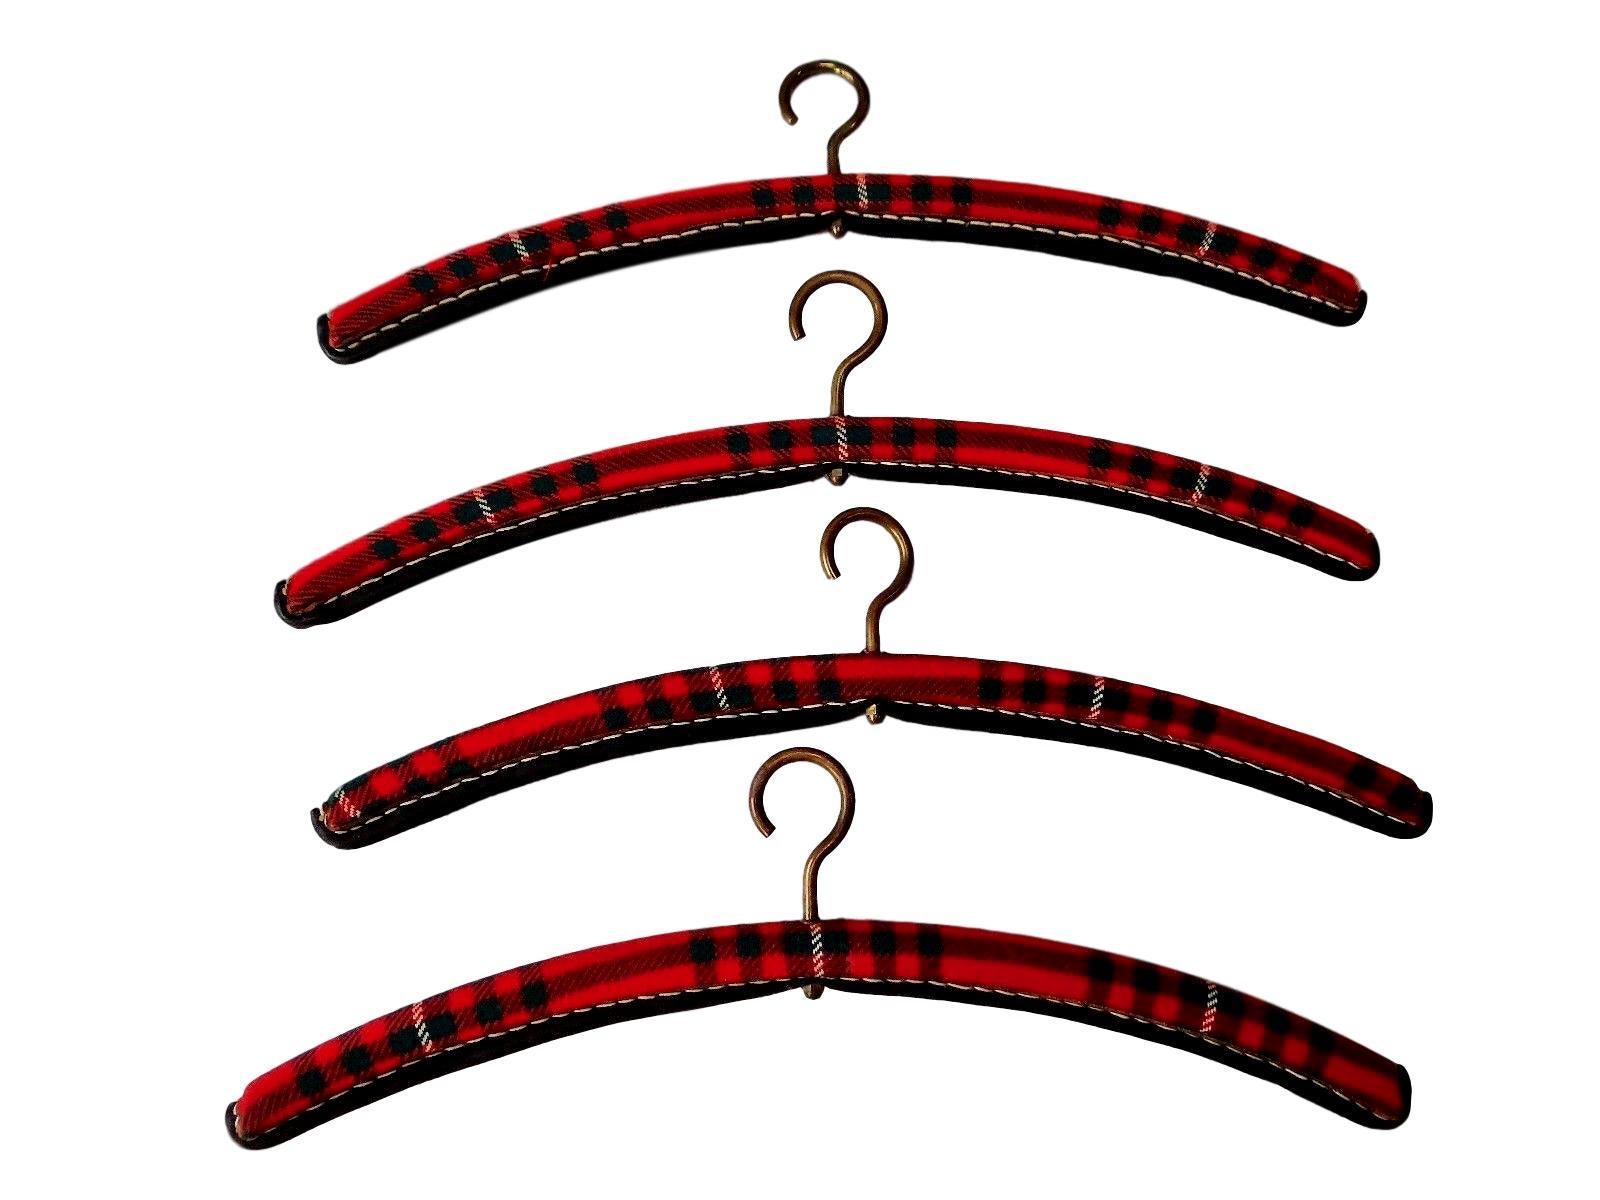 Rare coat hangers by French designer Jacques Adnet. Brass hardware with black leather, red tweed, and signature contrast stitching. Excellent vintage condition. Sold individually, 4 still available. 

